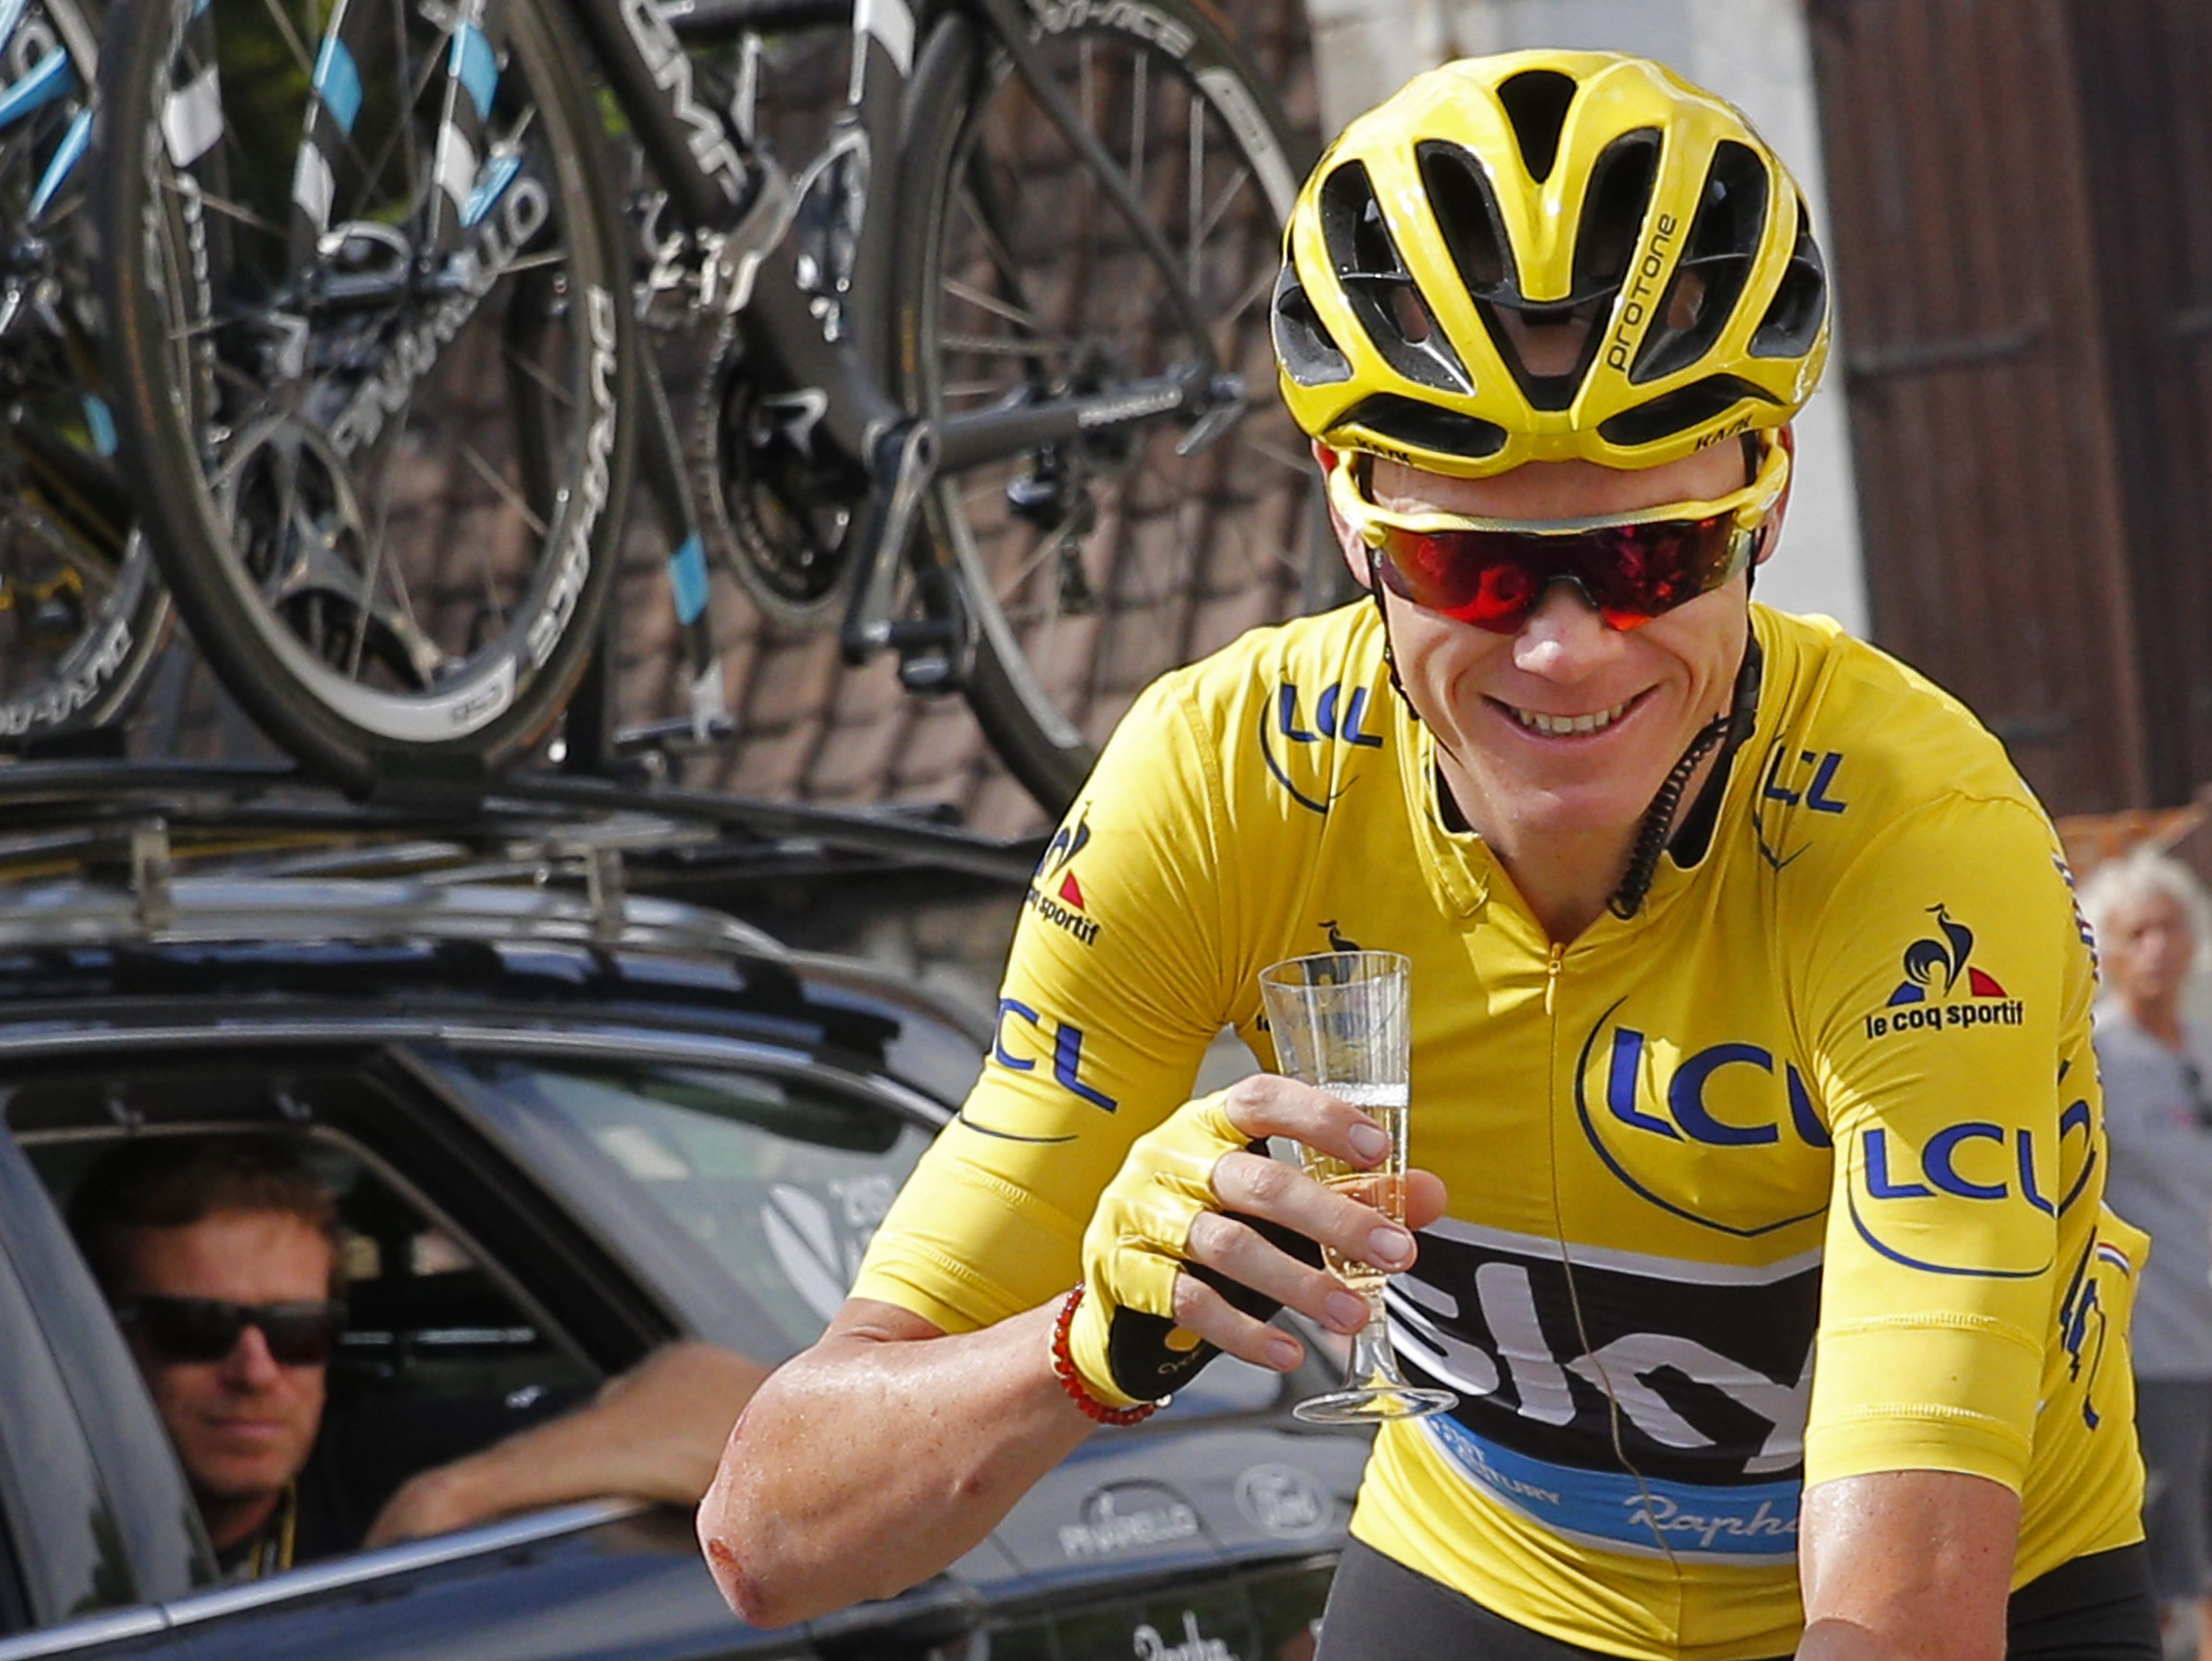 Britain's Chris Froome, wearing the overall leader's yellow jersey, celebrates with a glass of champagne during the twenty-first stage of the Tour de France cycling race over 113 kilometers (70.2 miles) with start in Chantilly and finish in Paris, France, Sunday, July 24, 2016.